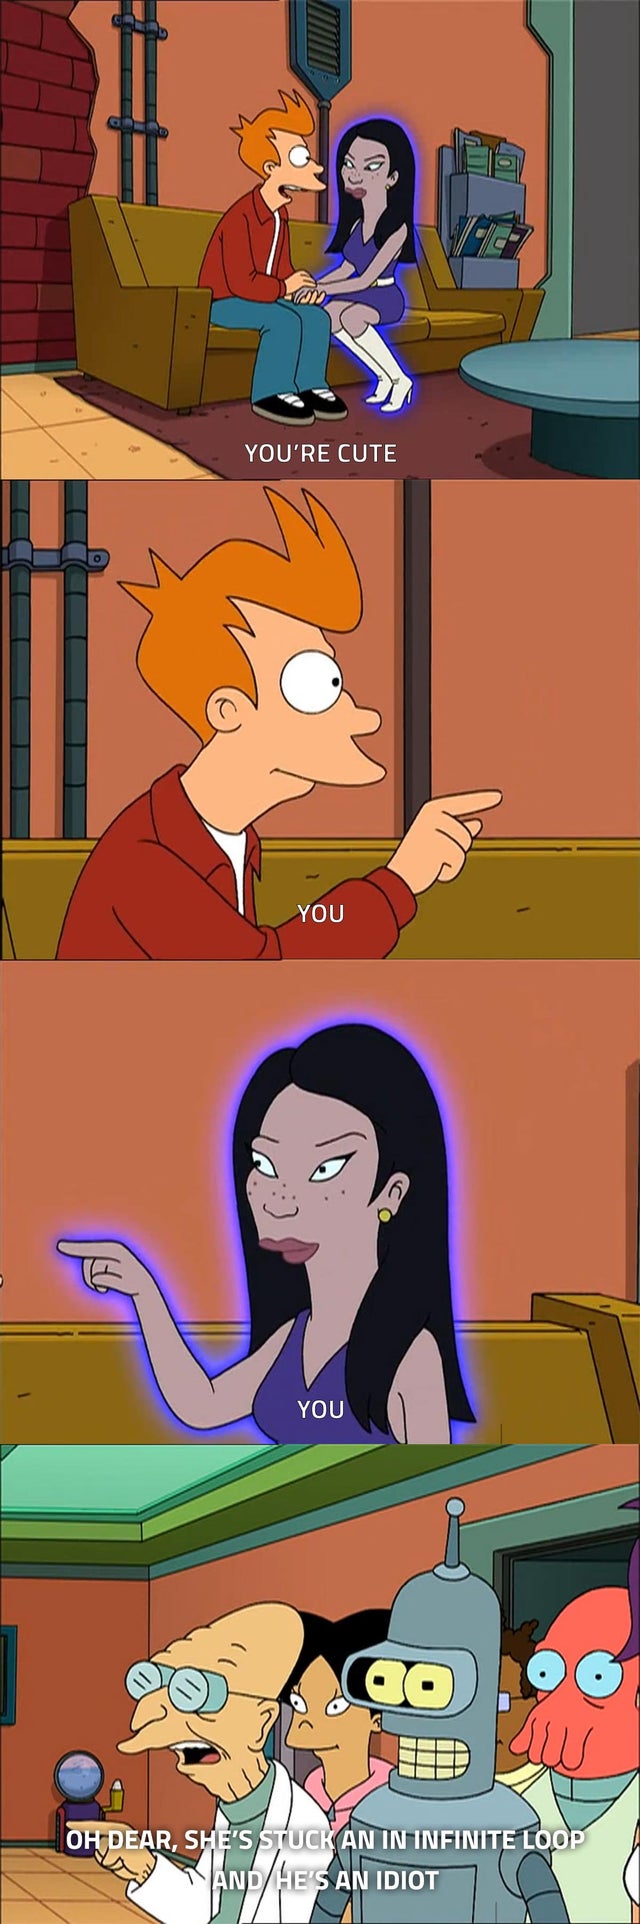 first panel: Lucy Lubot telling Fry "You're cure" while sitting on the couch. Second panel: Fry saying "you". Third panel: Lucy Lubot saying "you". Fourth panel: the rest of the gang watching them. Professor Farnsworth says "Oh God. She's stuck in a infinite loop and he's an idiot".